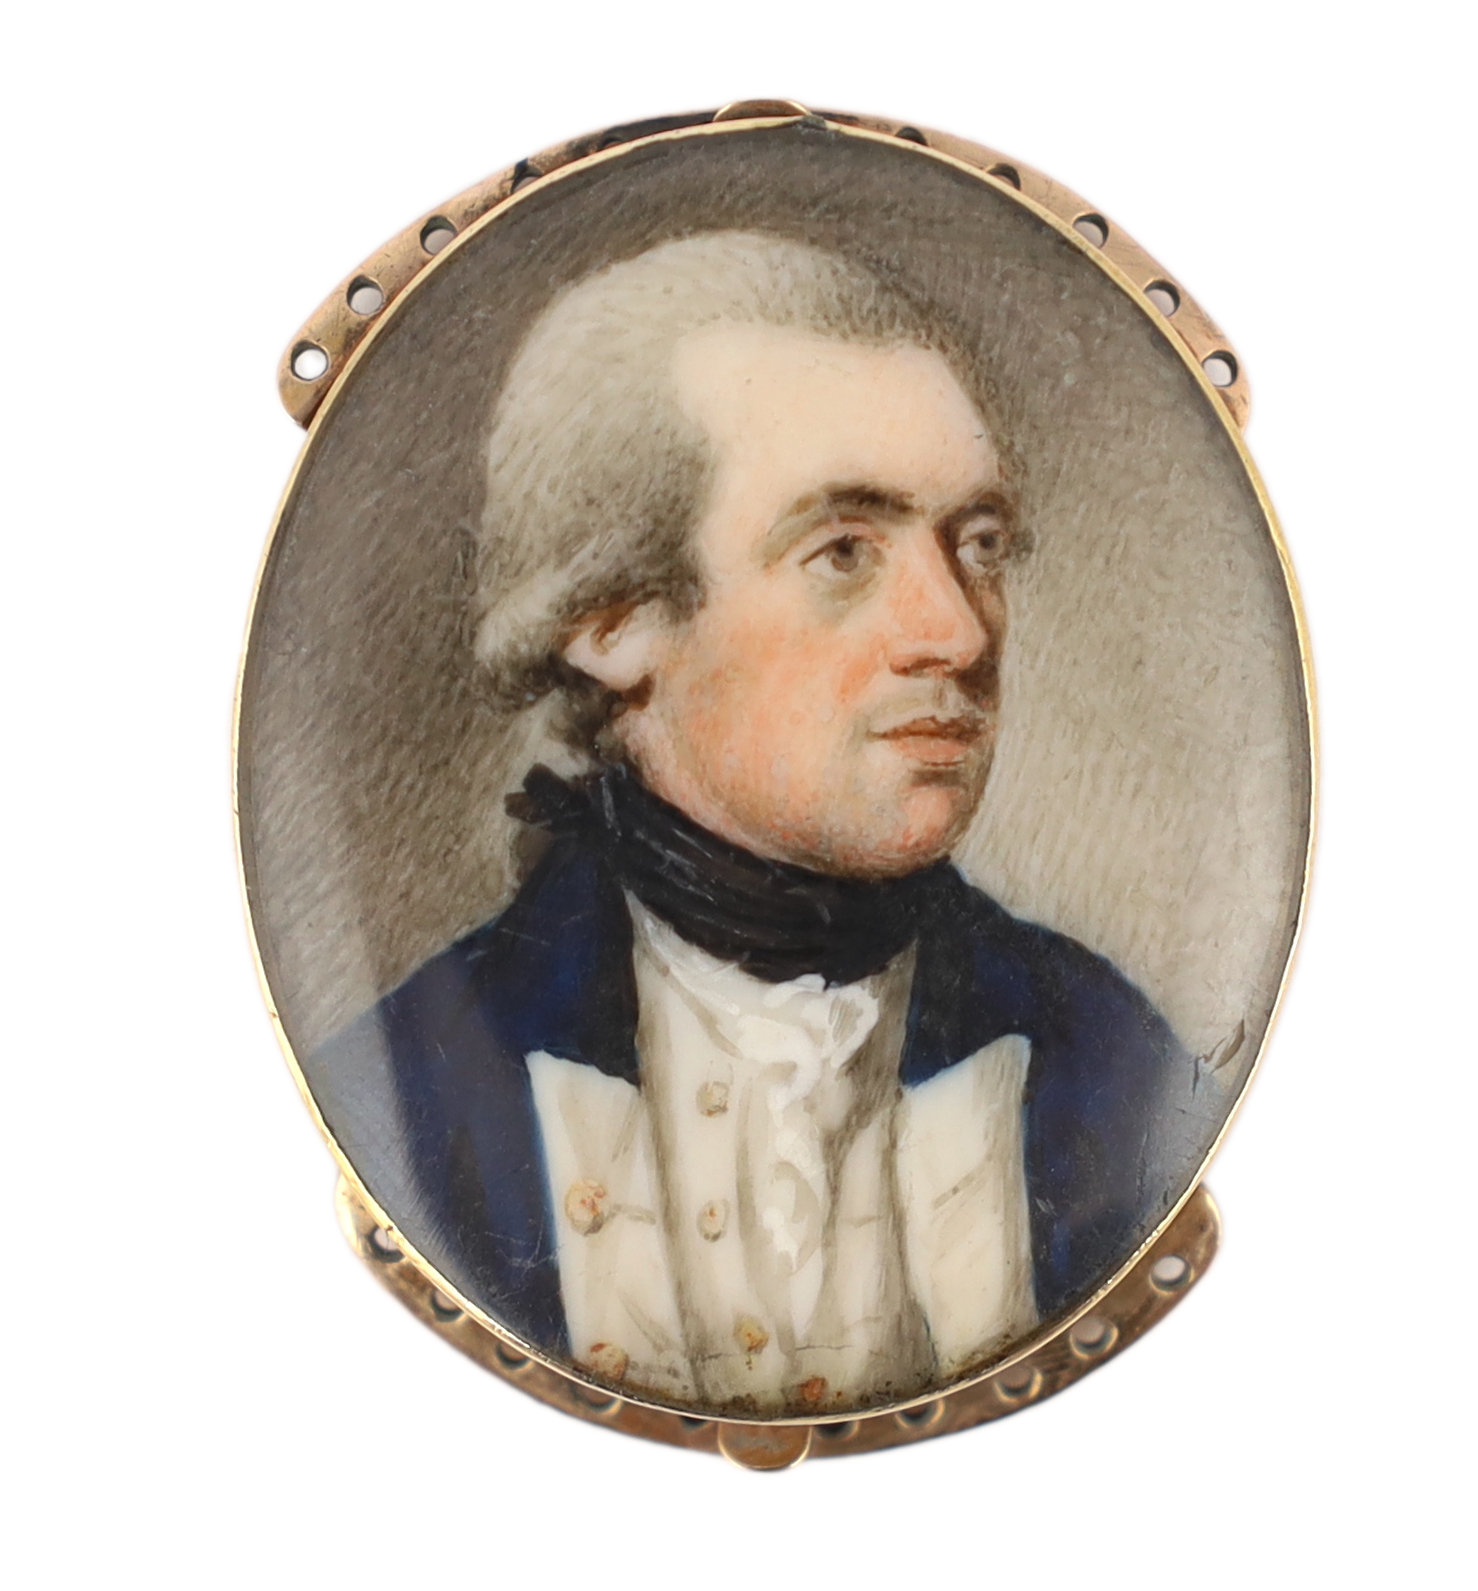 Jeremiah Meyer, R.A. (Anglo-German, 1735-1789), Portrait miniature of a naval officer, watercolour on ivory, 3.5 x 2.8cm. CITES Submission reference 896MN57T